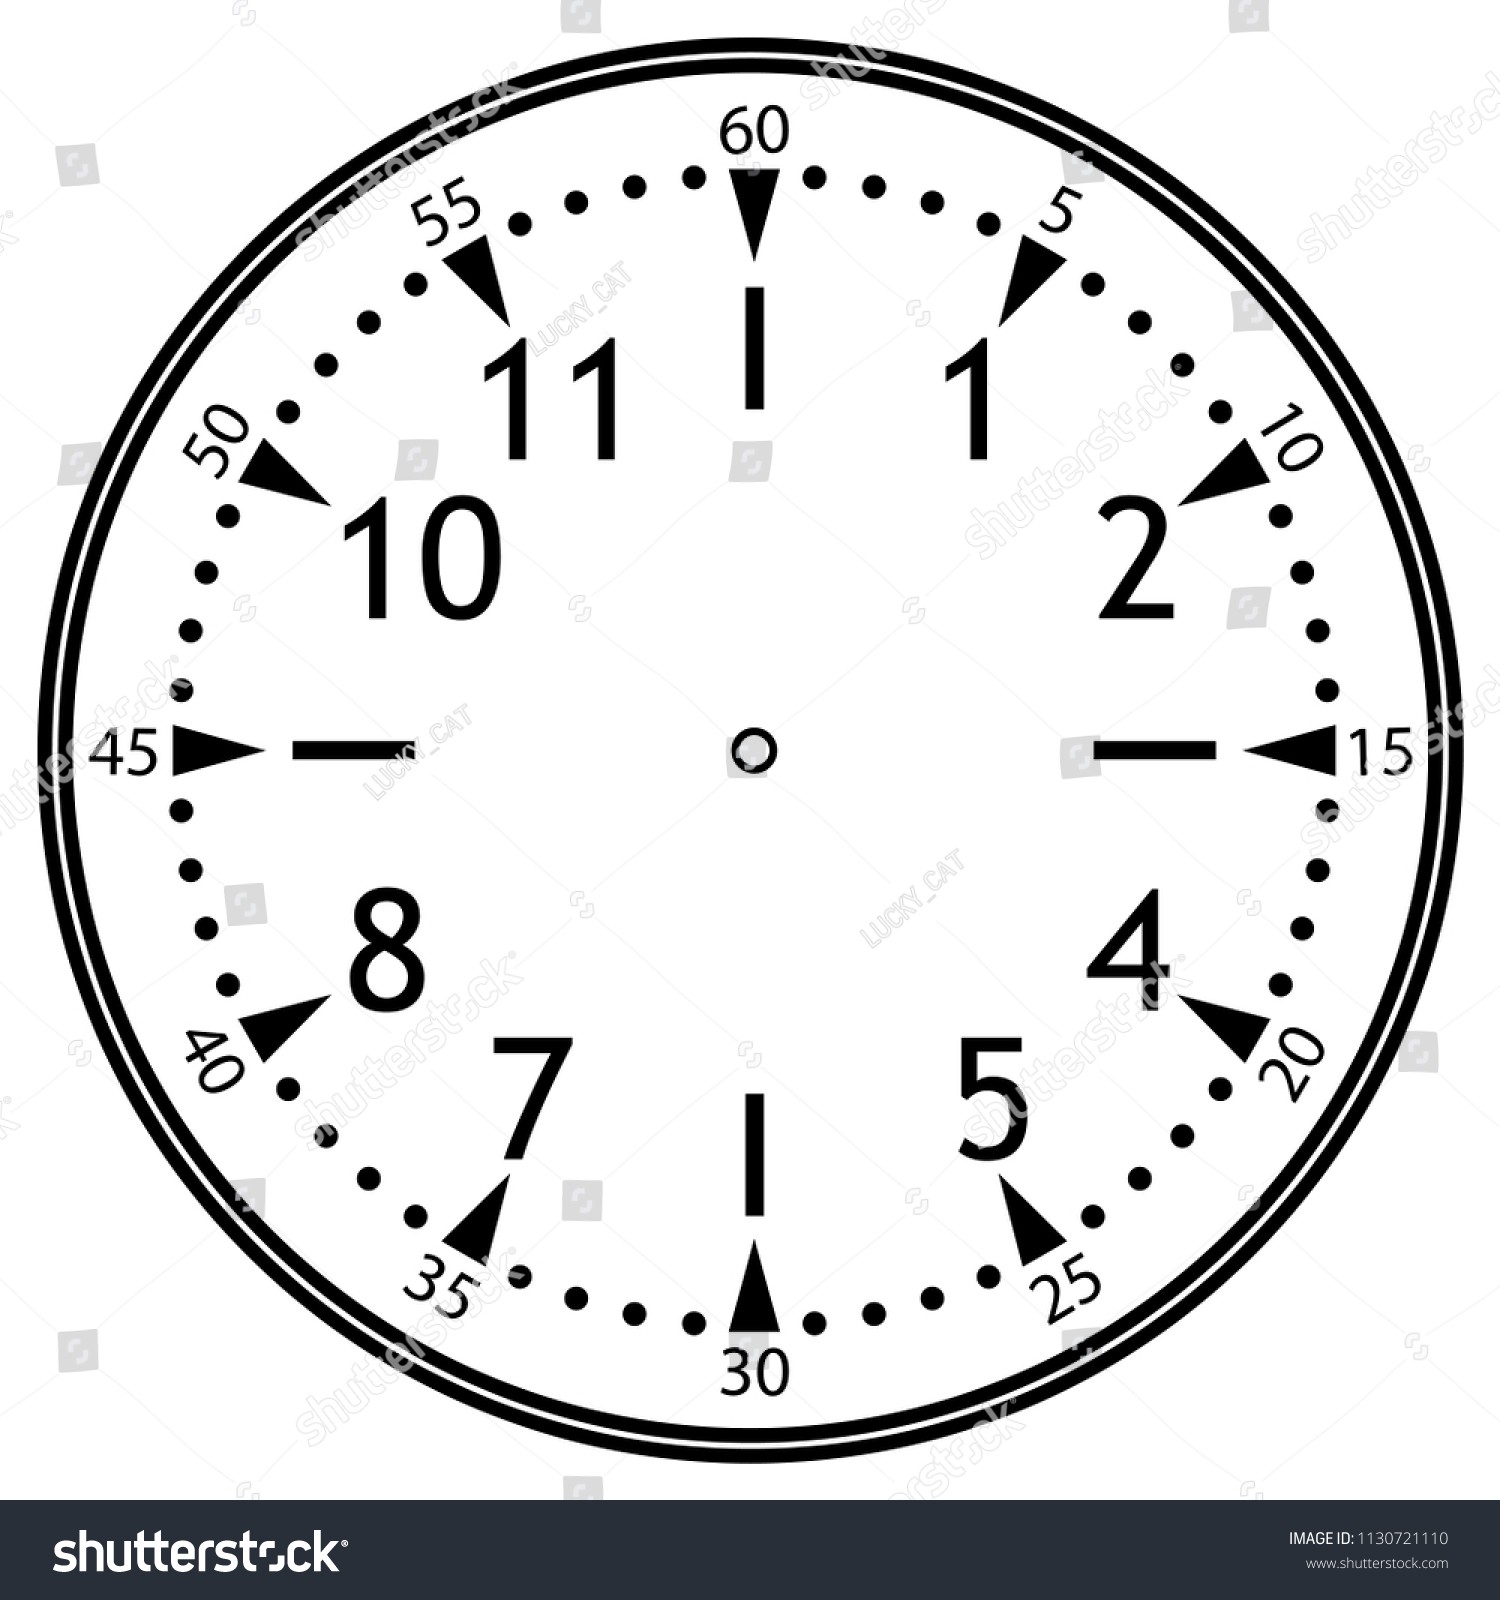 Clock face for house, alarm, table, kitchen, - Royalty Free Stock ...